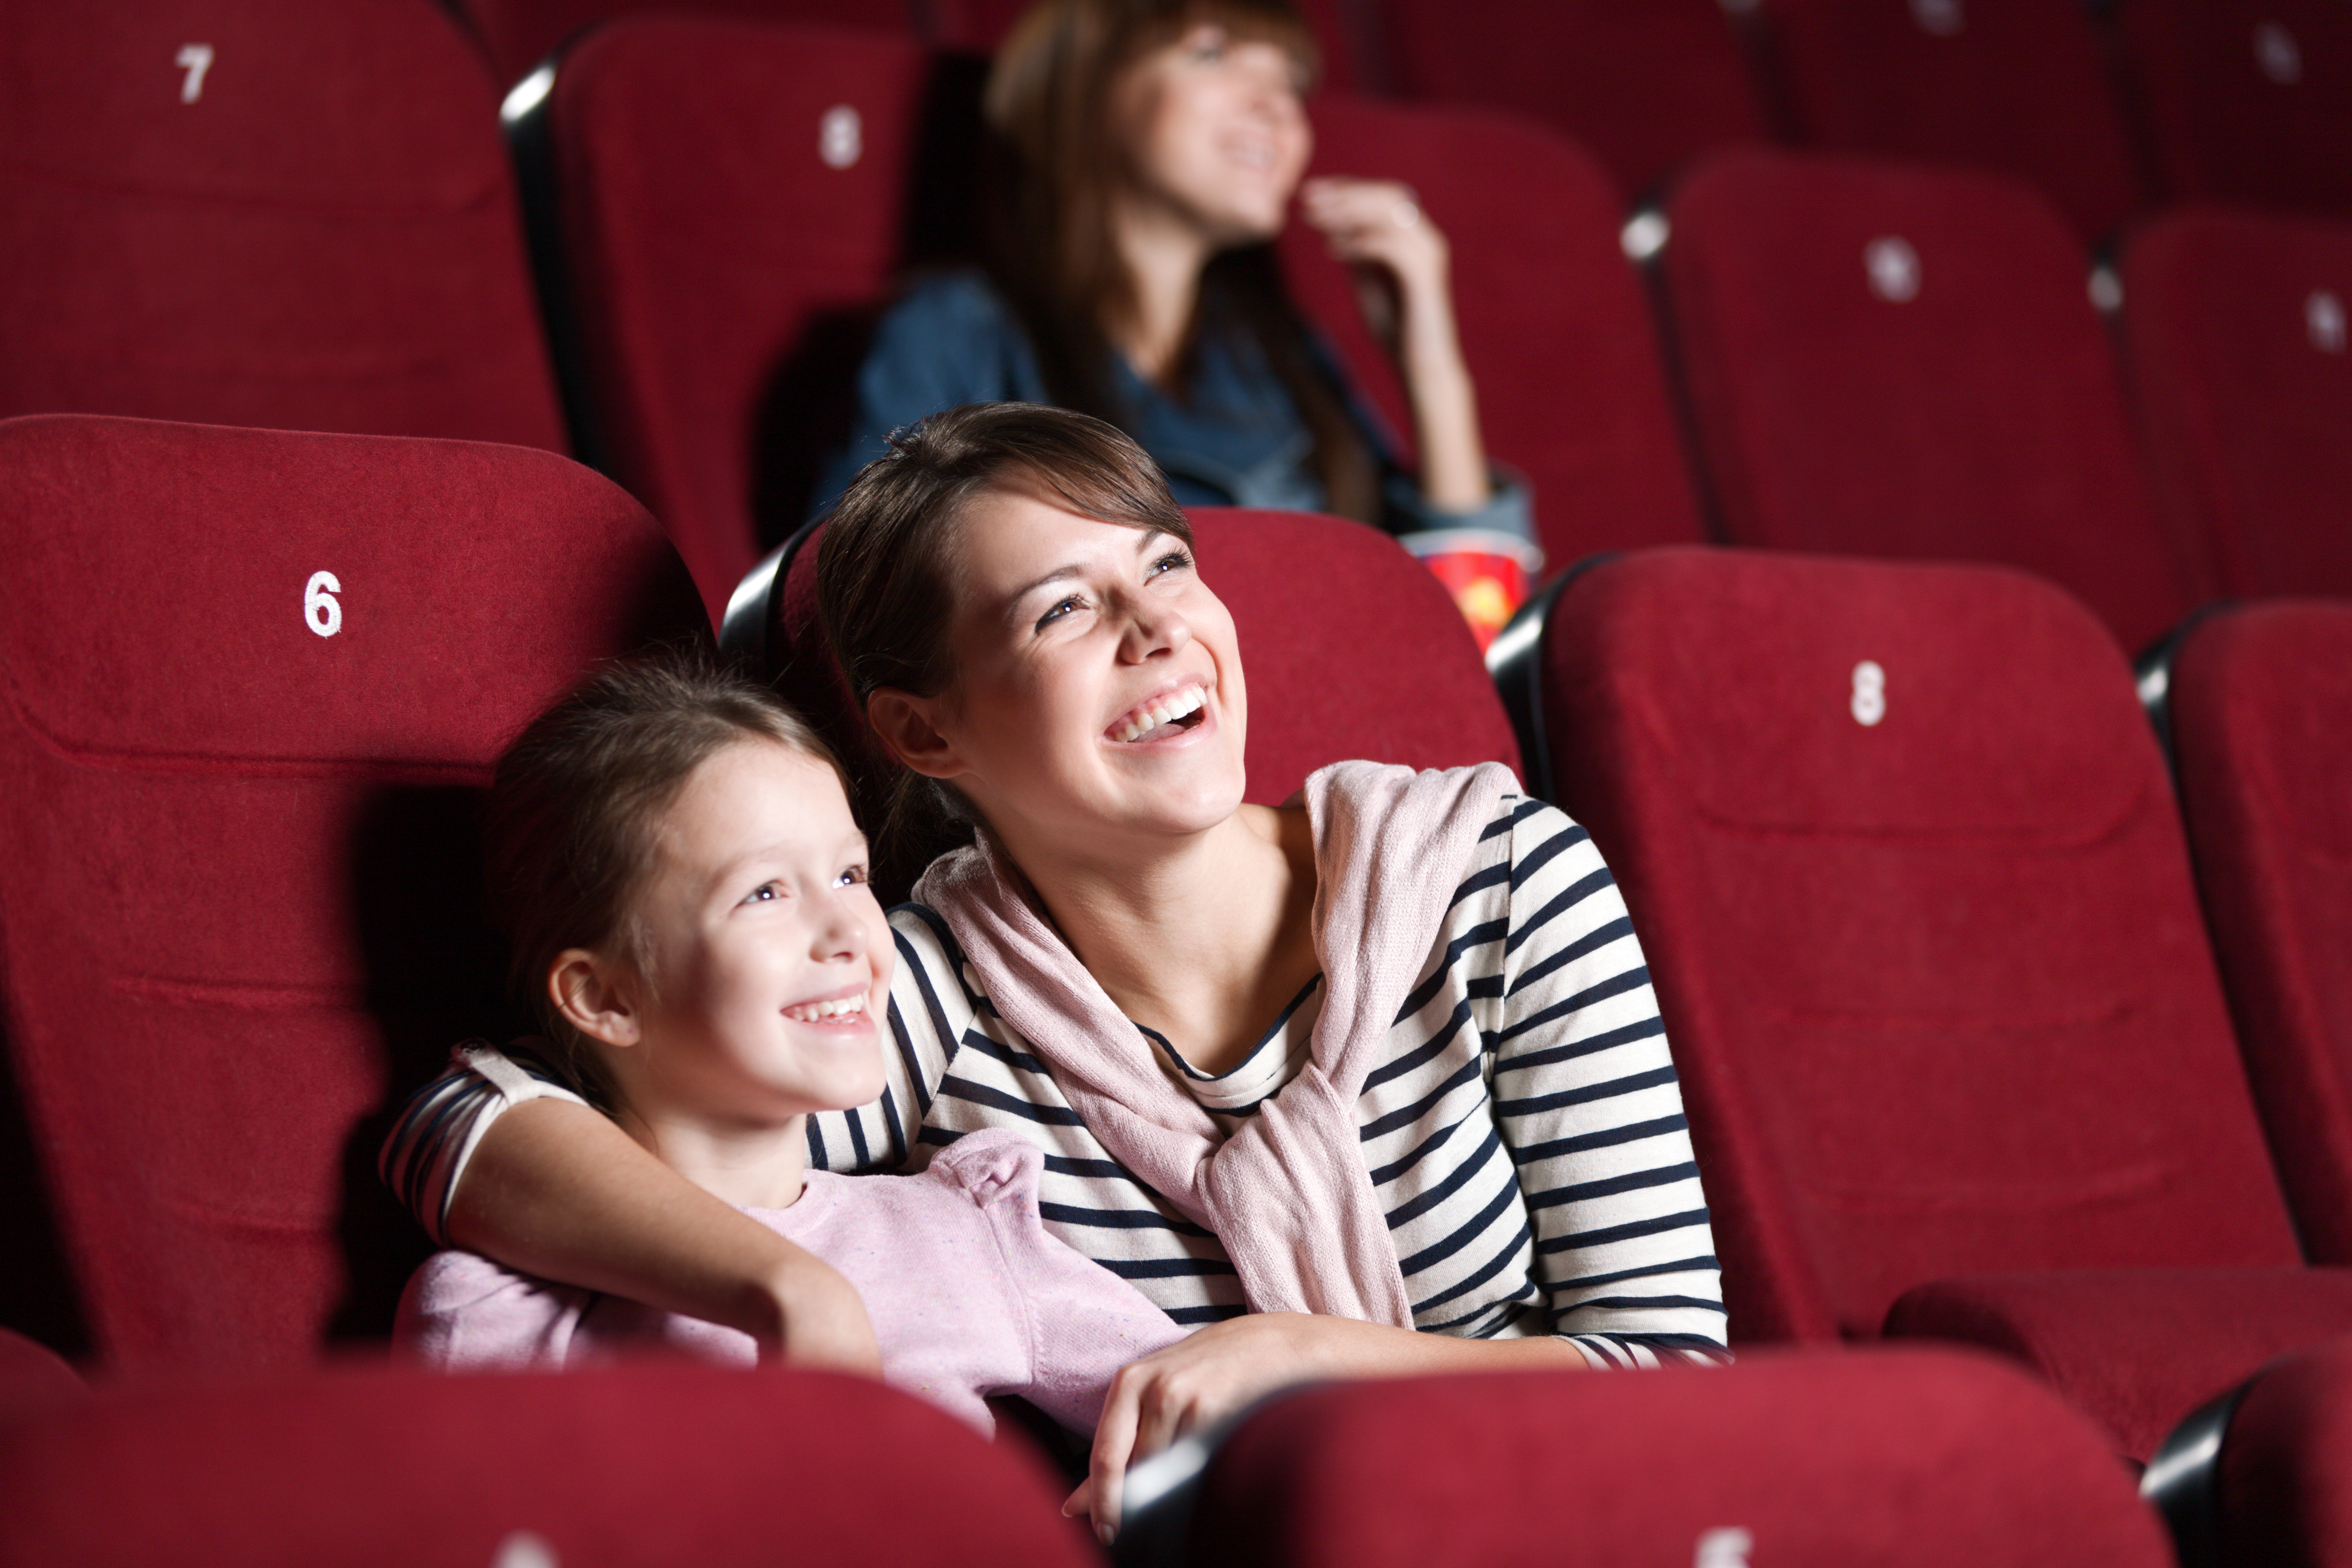 A mother watching a movie with her little daughter | Source: Shutterstock